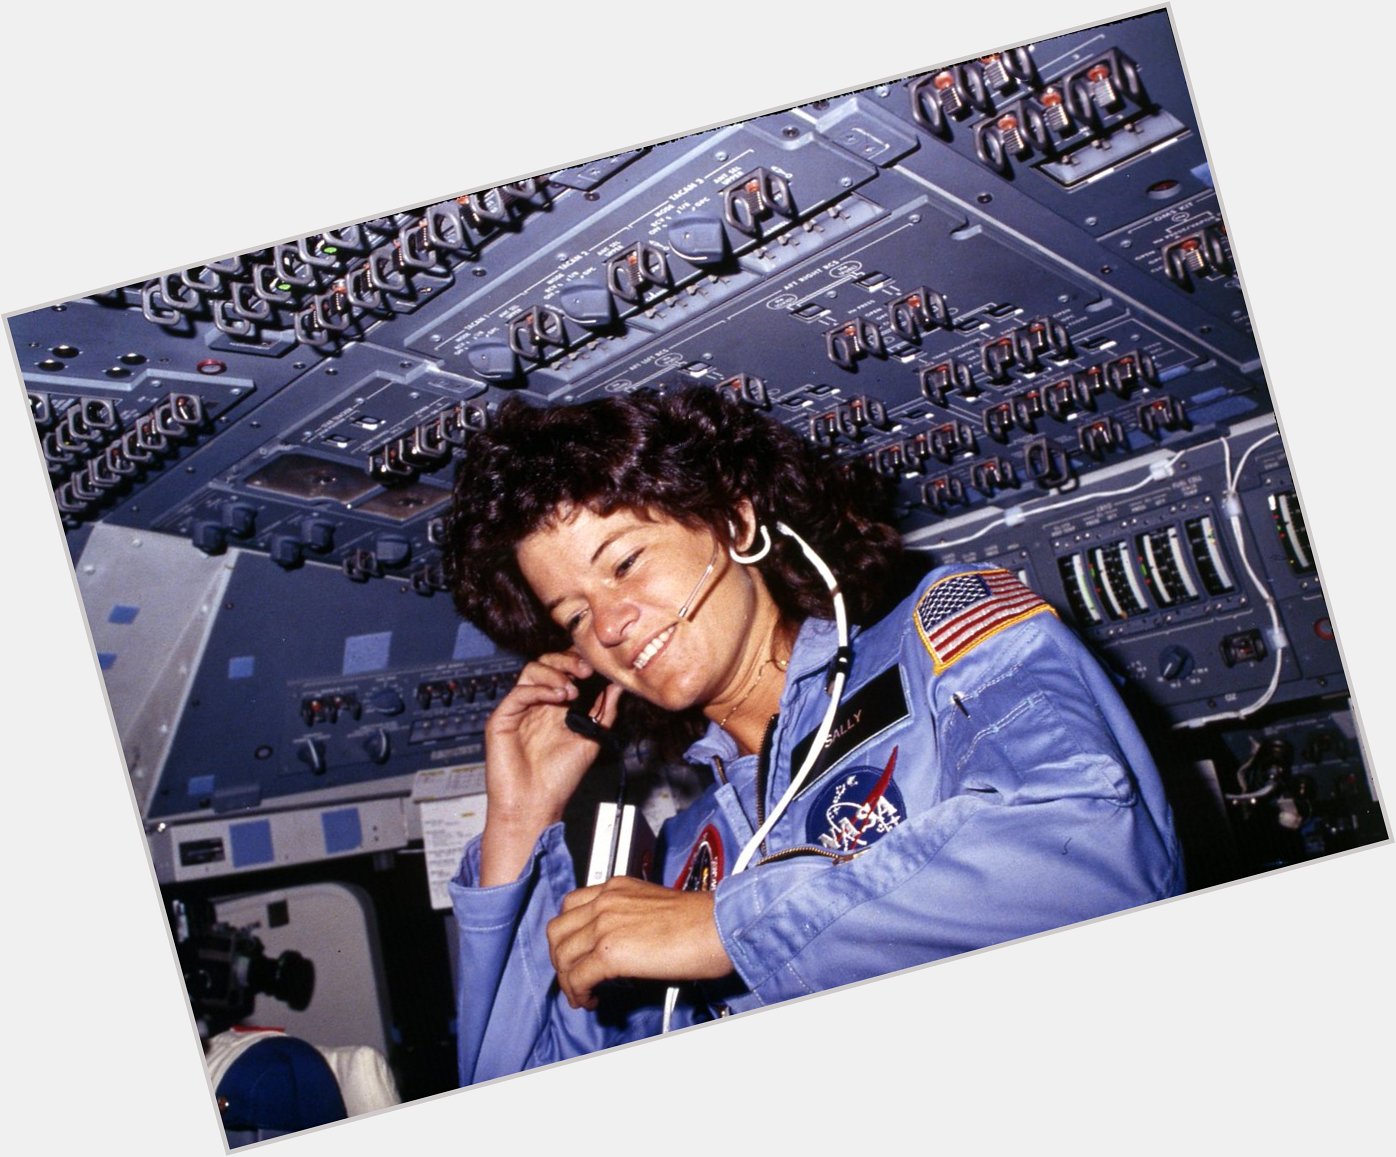 Happy Birthday to the late Sally Ride, the first U.S. woman in space!   